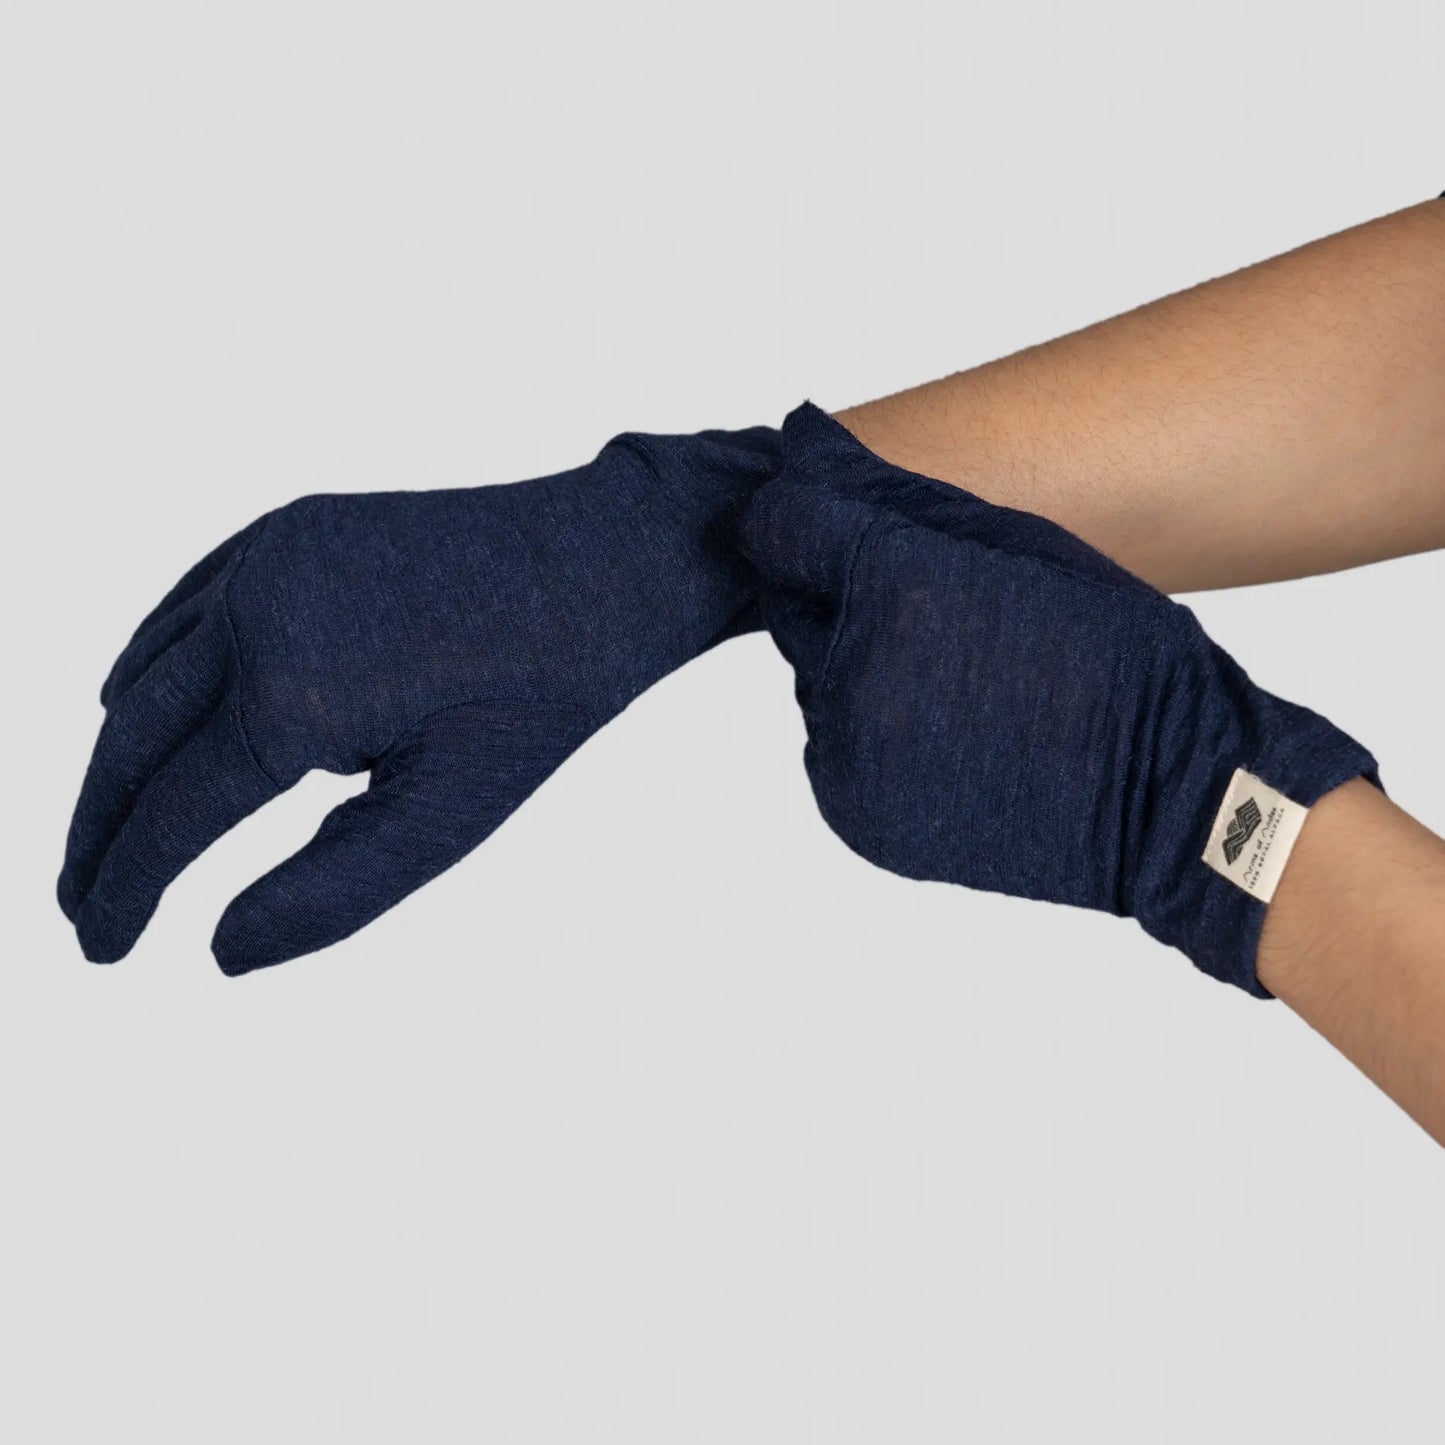 glove most comfortable liners ultralight color navy blue